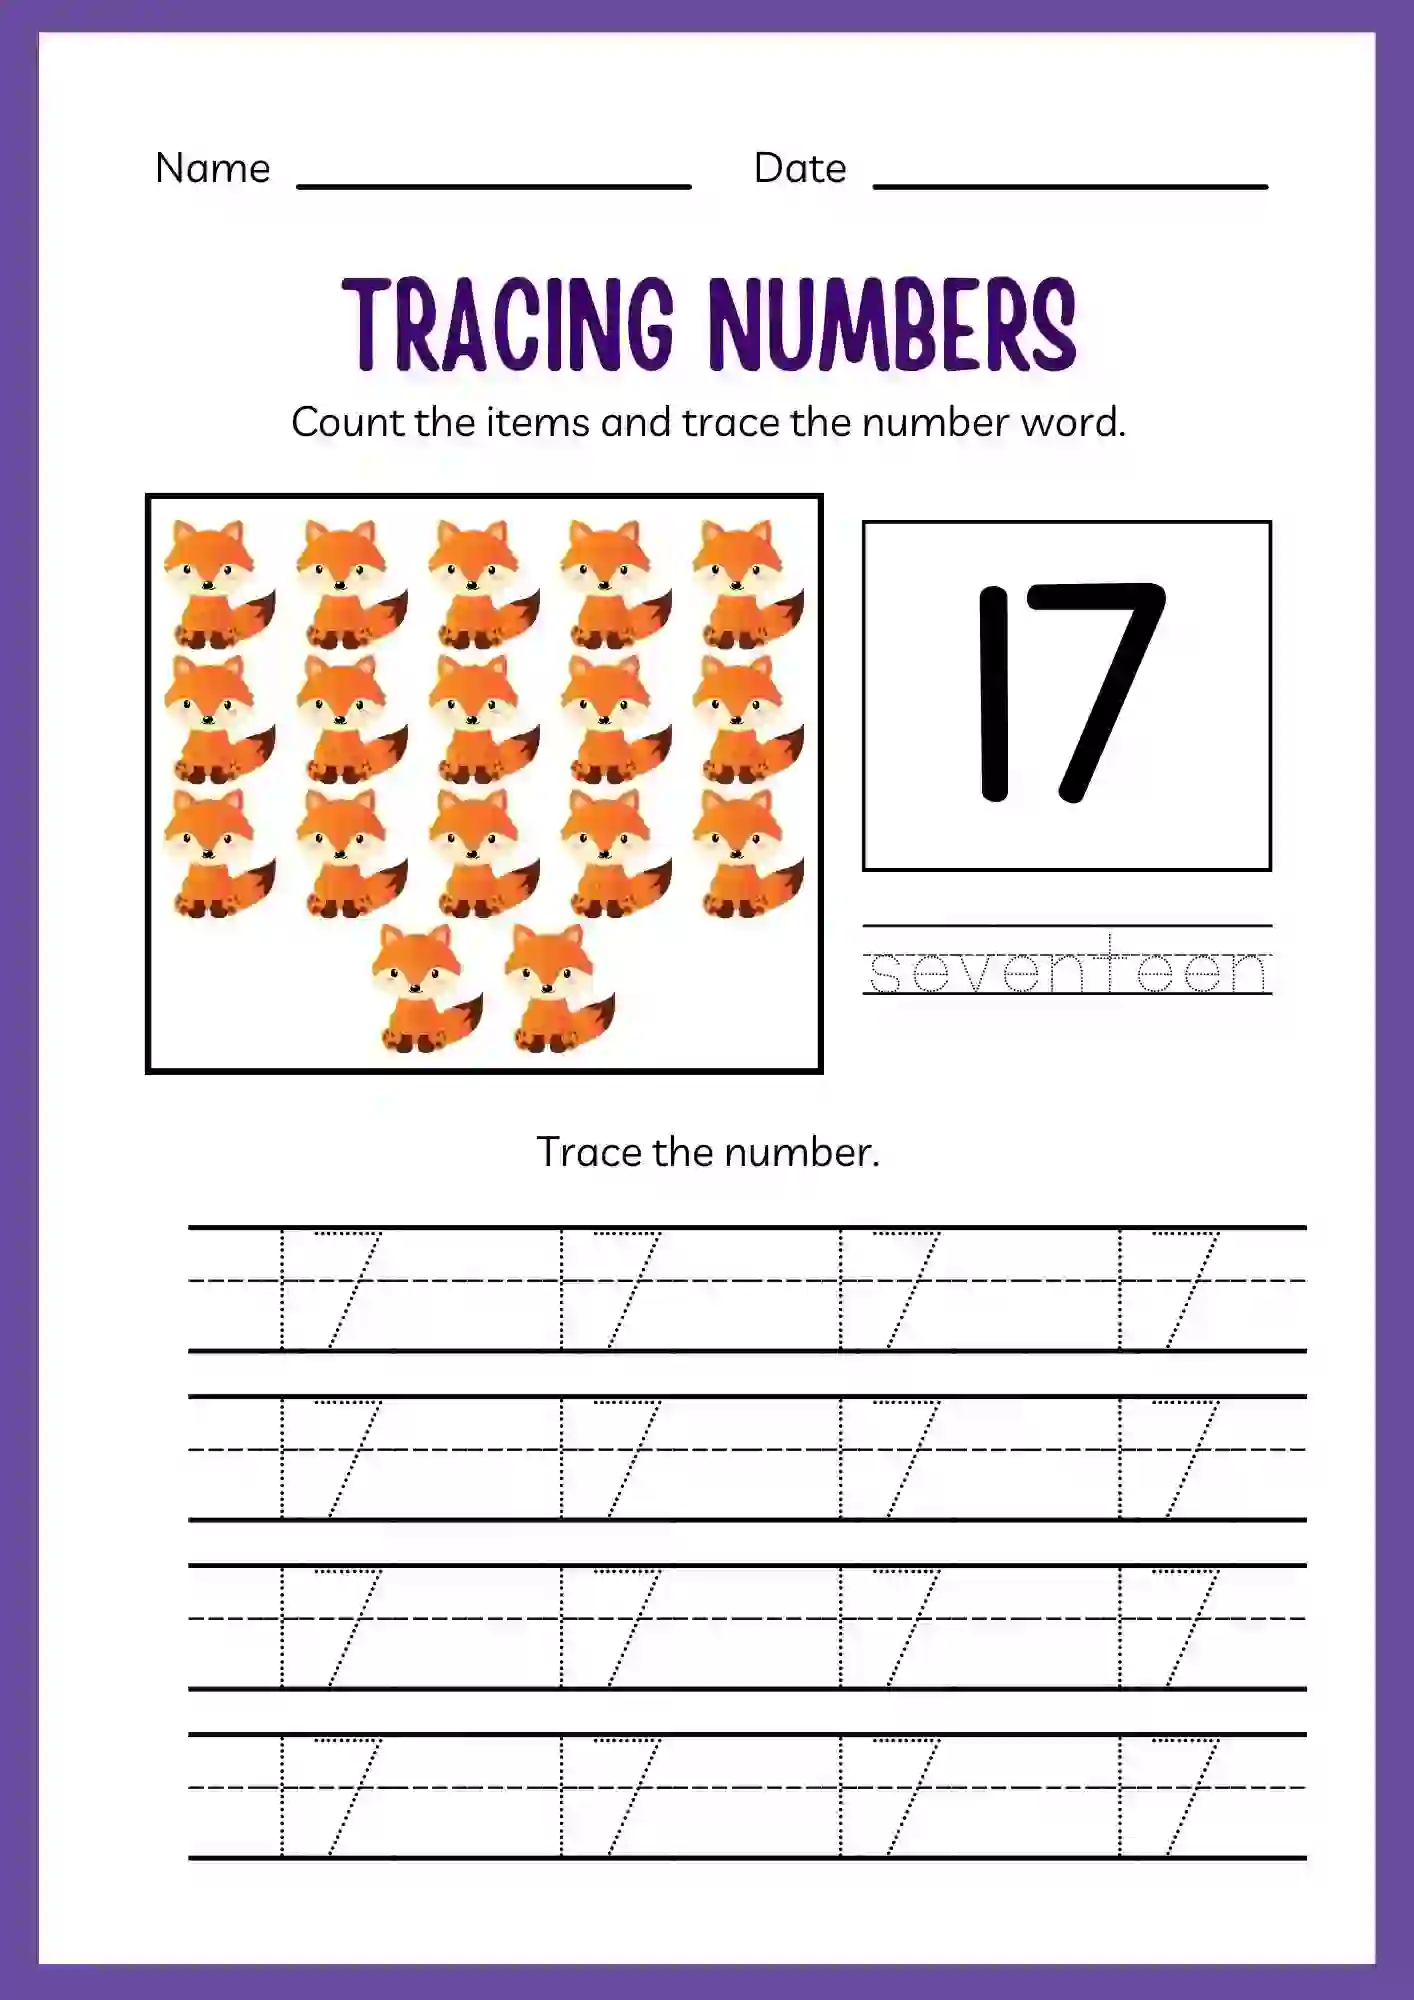 Number Tracing Worksheets 1 to 20 (Number 17 tracing sheet)